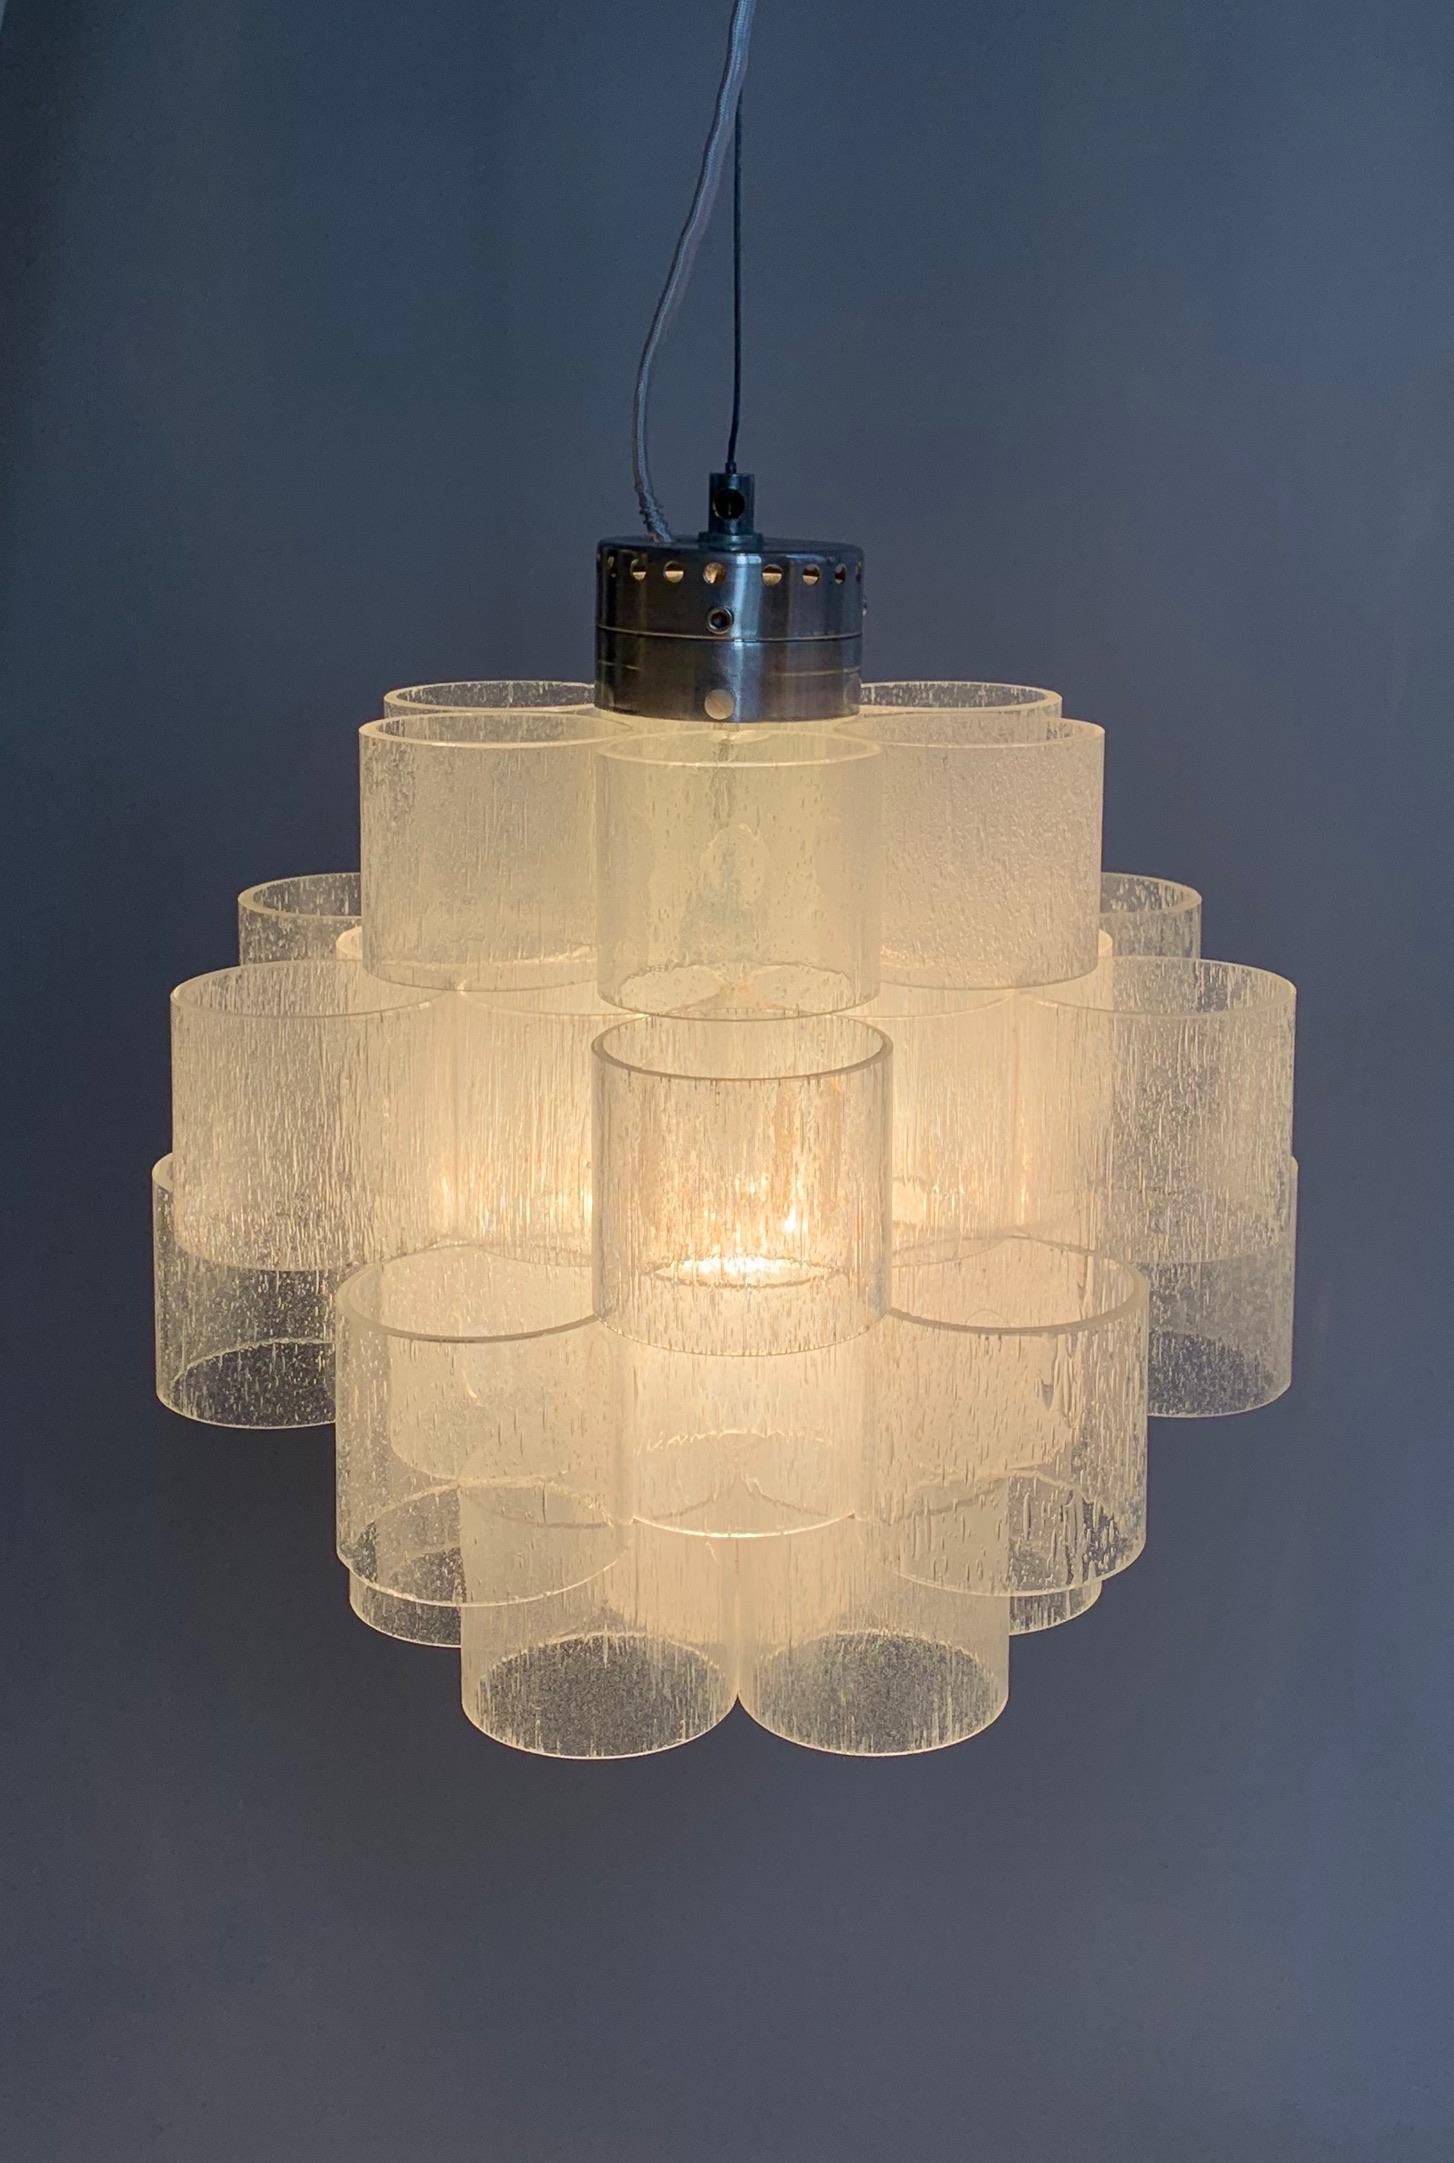 Chandelier composed of 36 cast glass cylinder components. With single 100watt lightbulb.